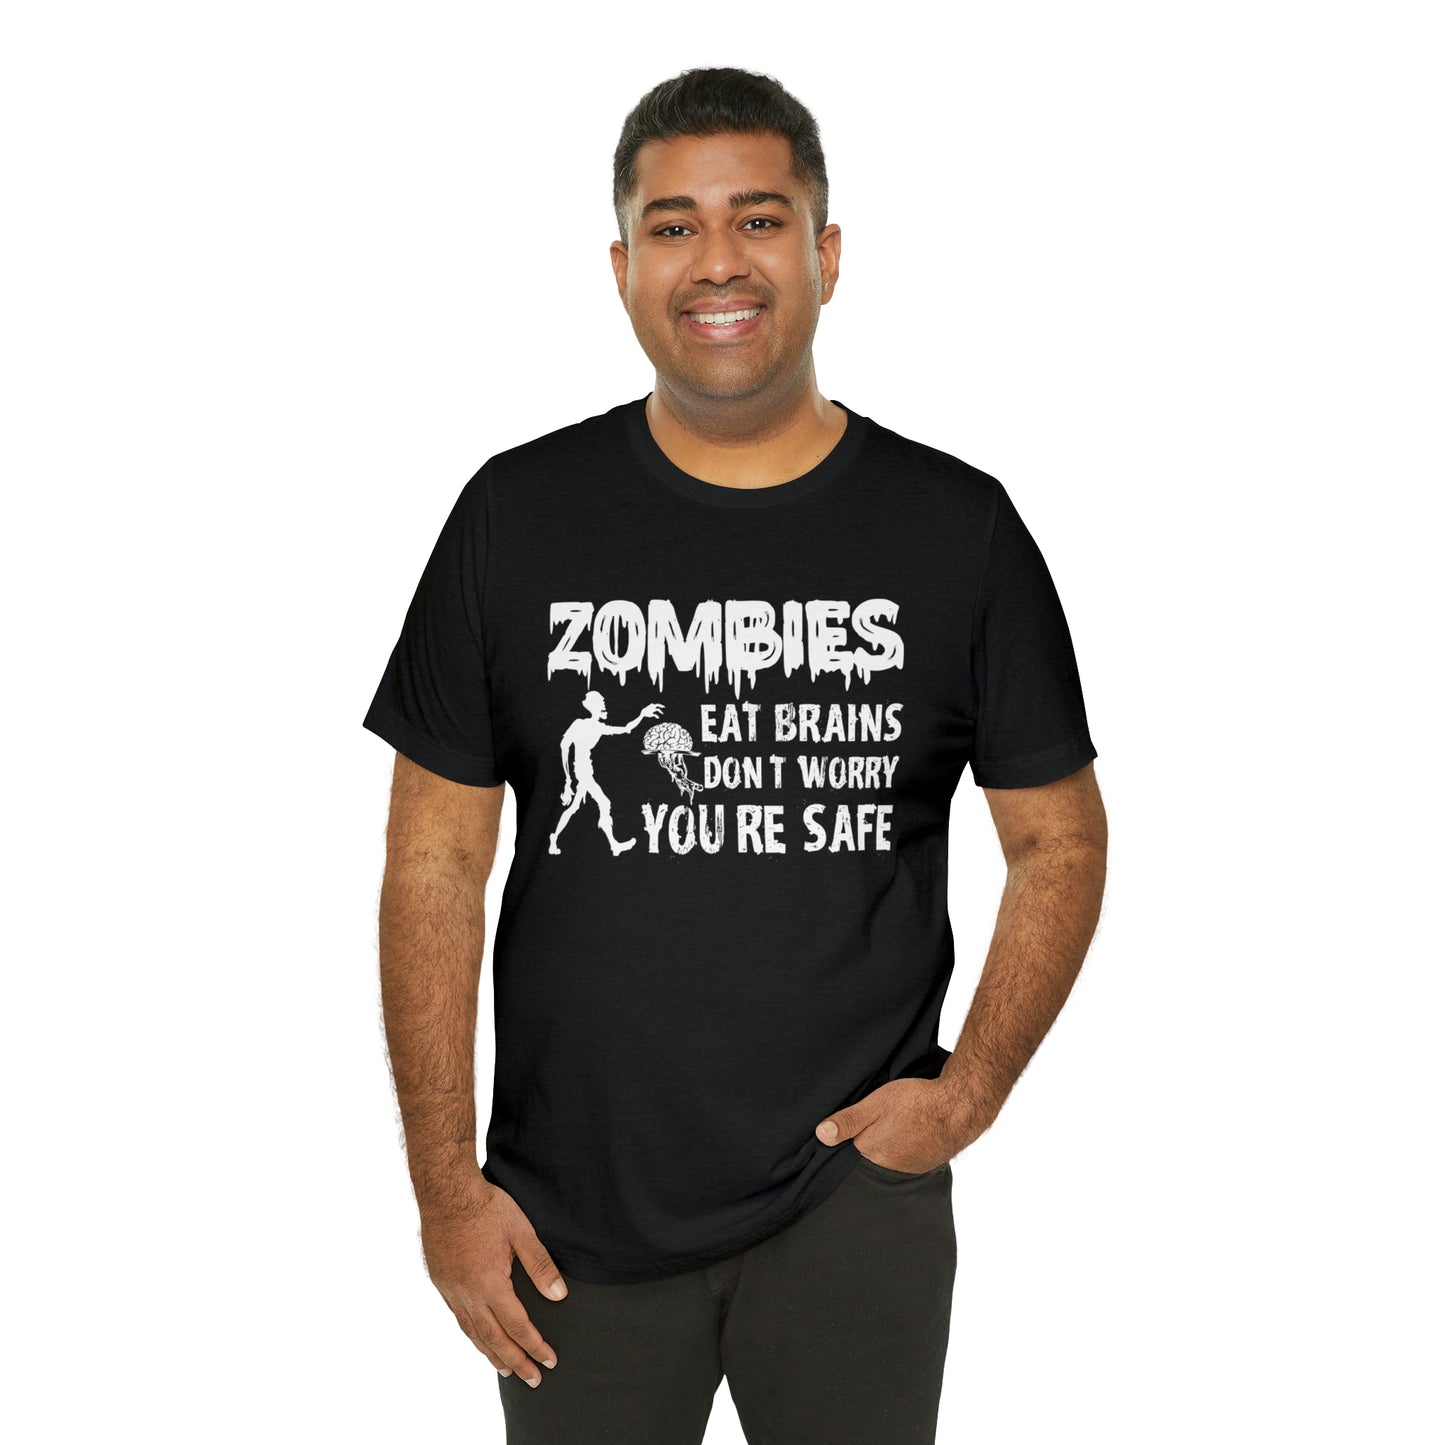 Don't Worry Zombies Eat Brains Tee